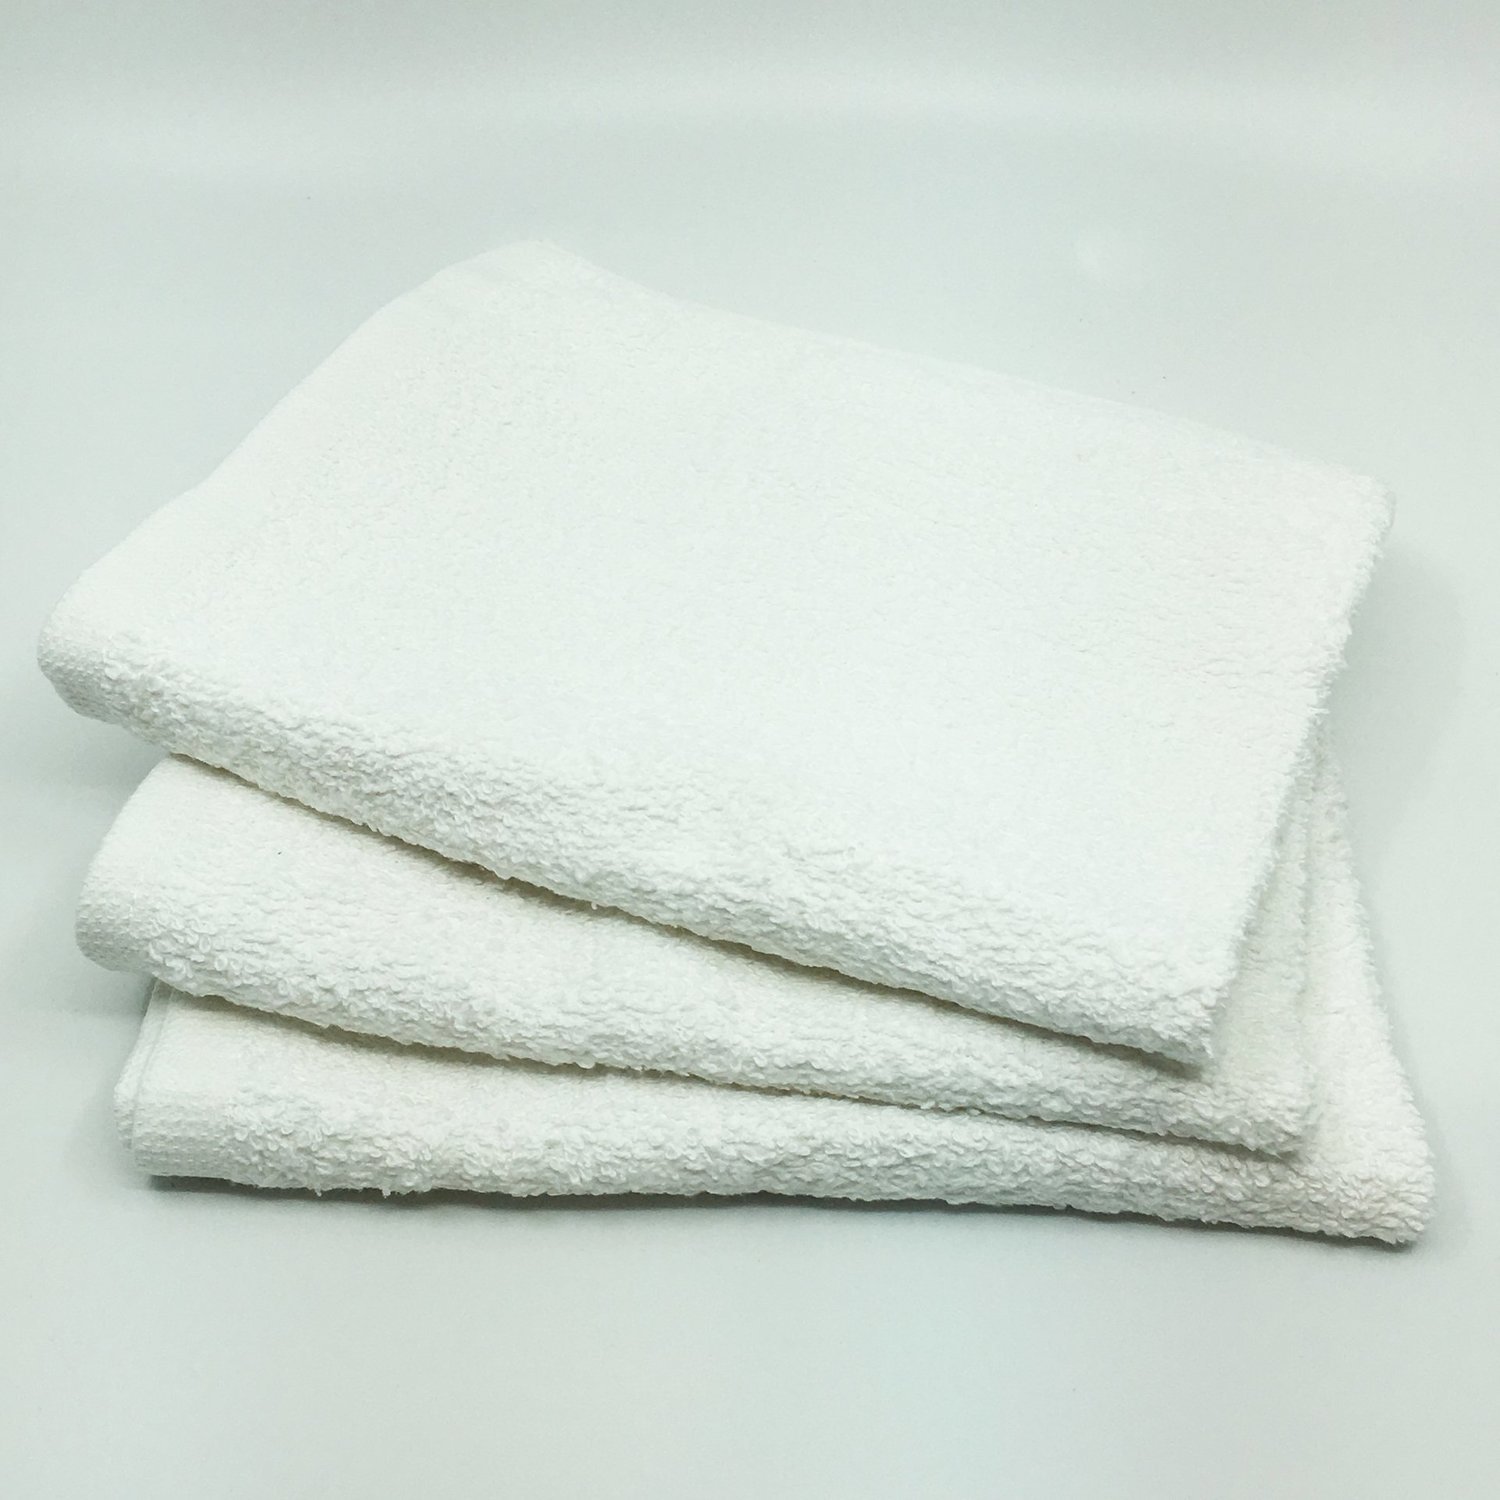 Premium Terry Cloth Towels - Add On Only